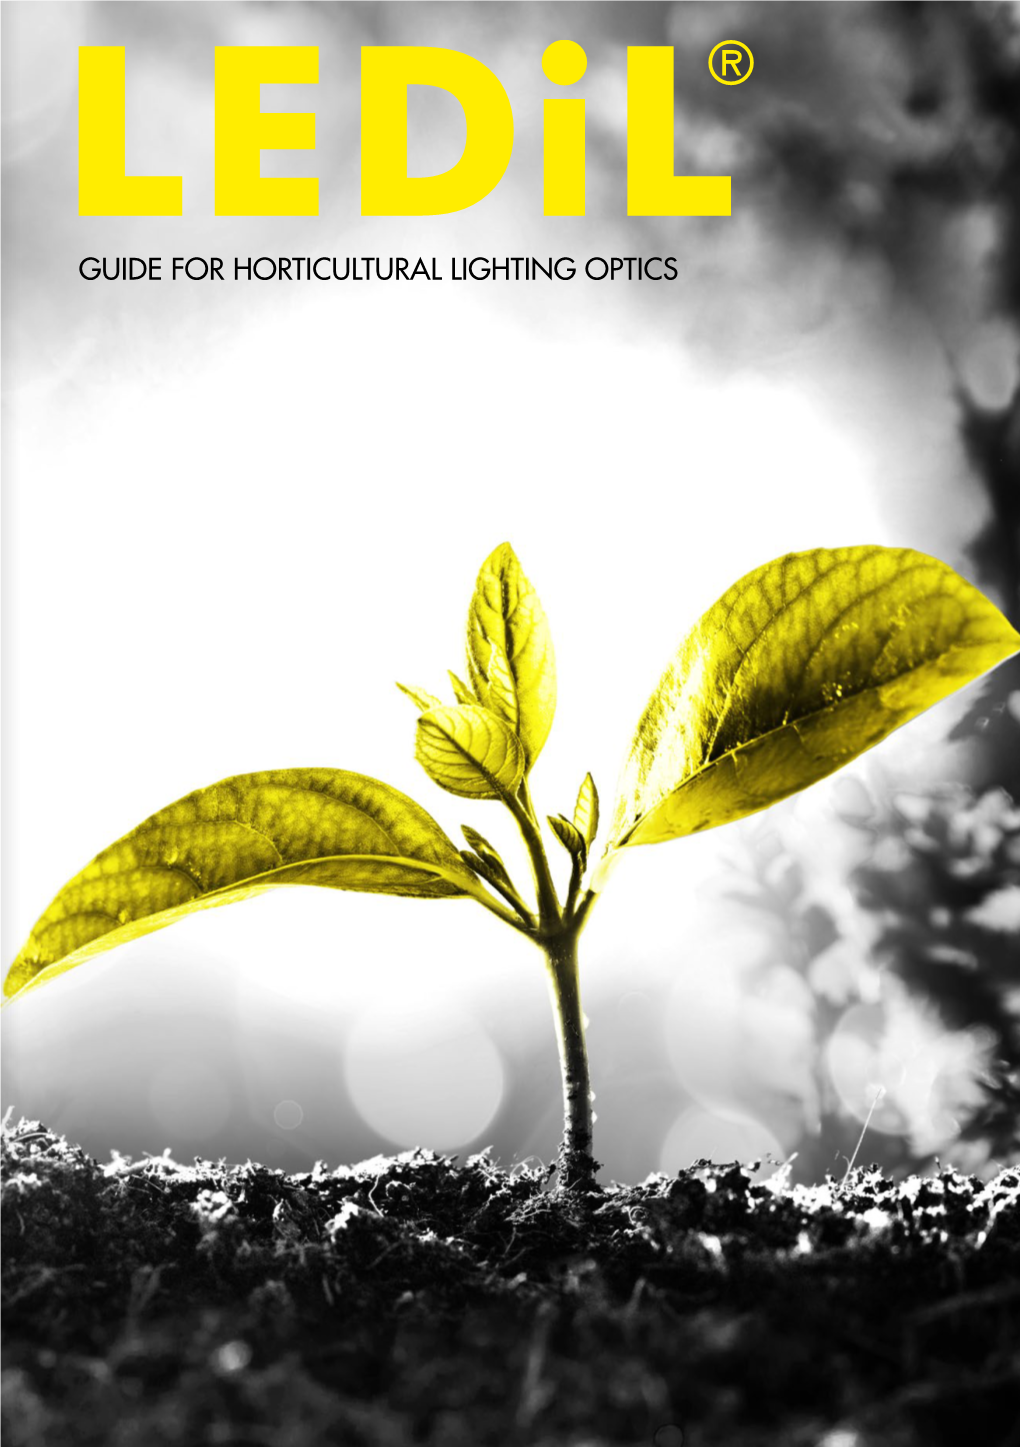 GUIDE for HORTICULTURAL LIGHTING OPTICS HORTICULTURAL LIGHTING in a NUTSHELL WHY Ledil?